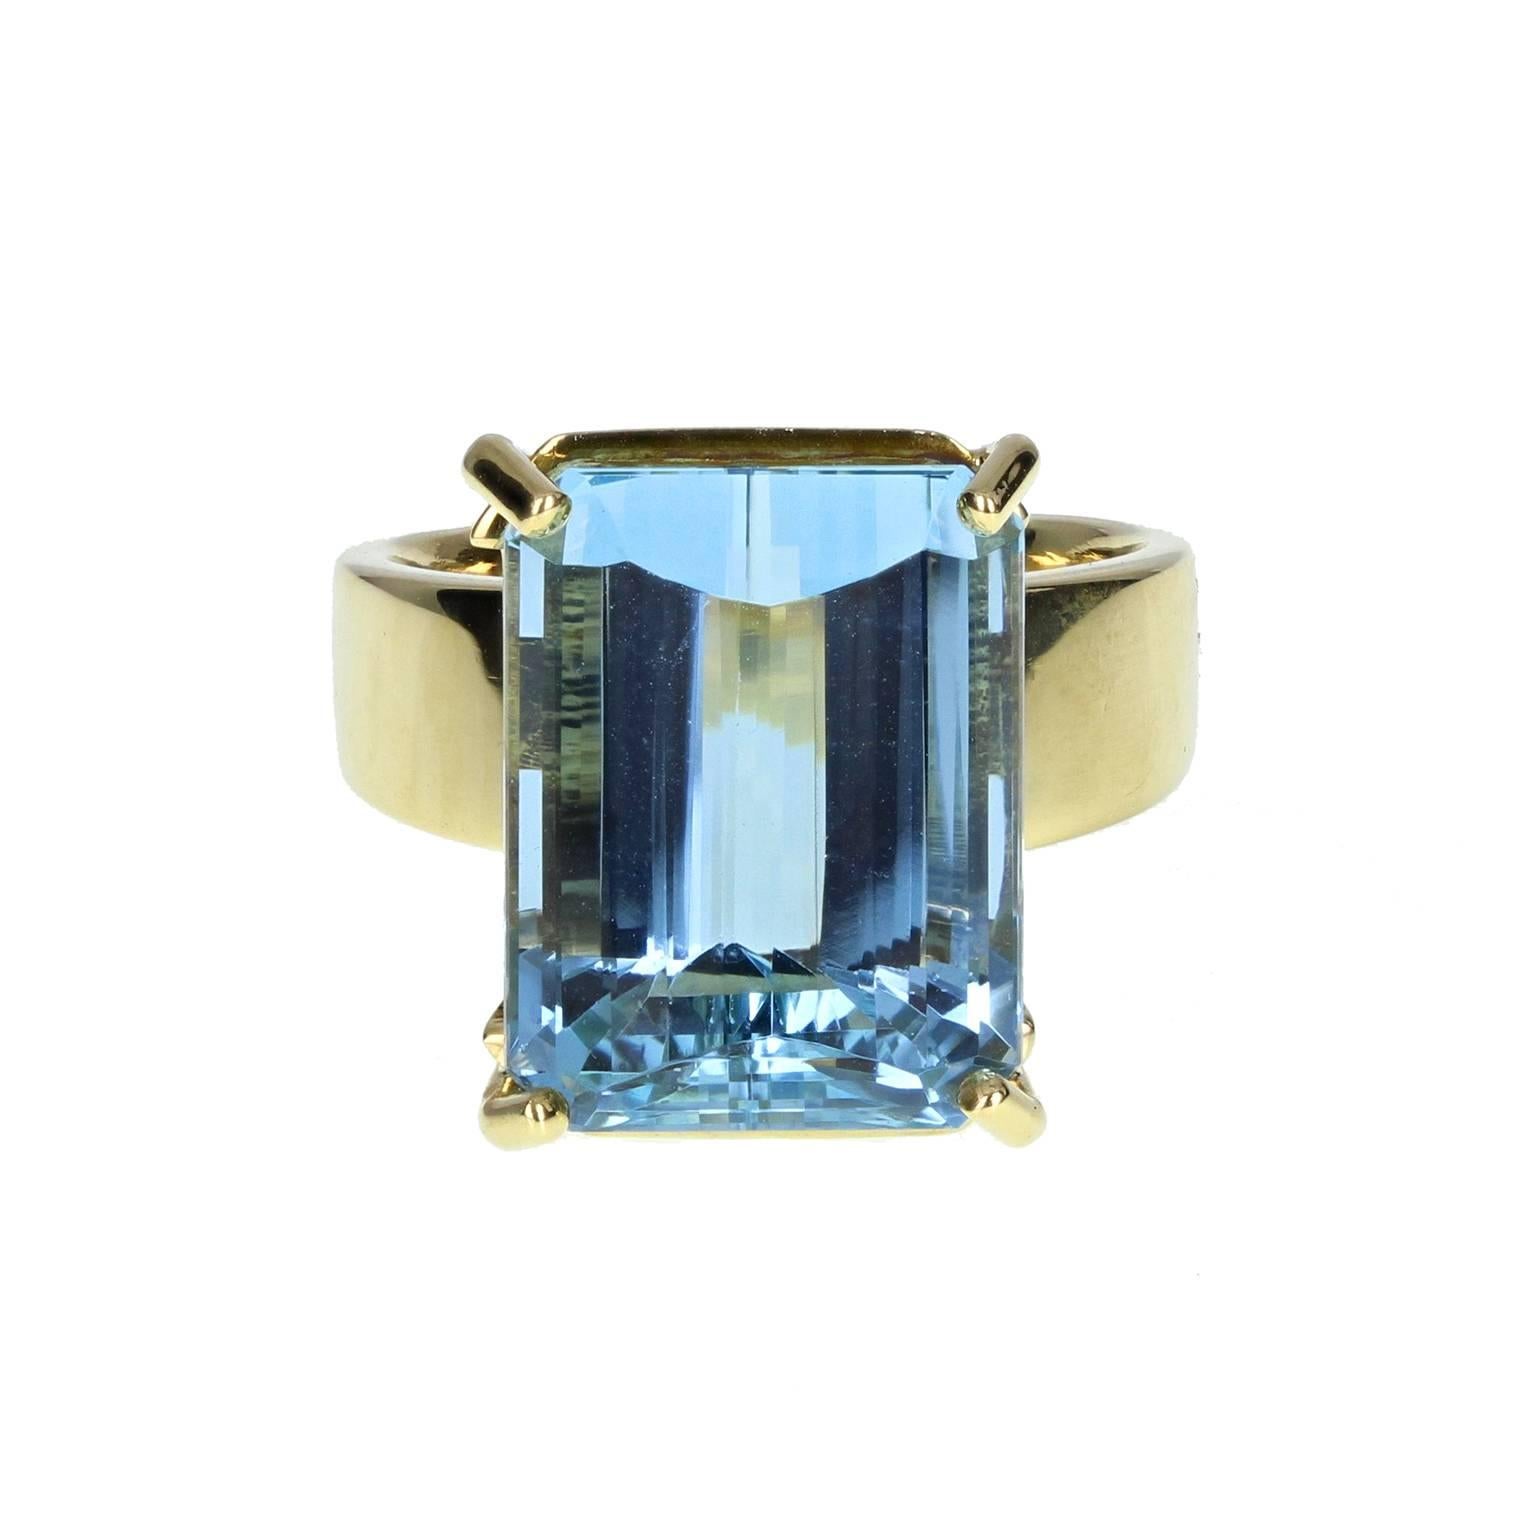 An exceptional cocktail ring fashioned from 18 carat gold. Simple, modern four-claw setting mounted with a single modified emerald-cut aquamarine of very fine quality. Wide shank tapers and terminates with a moulded lions/panthers head. Stamped